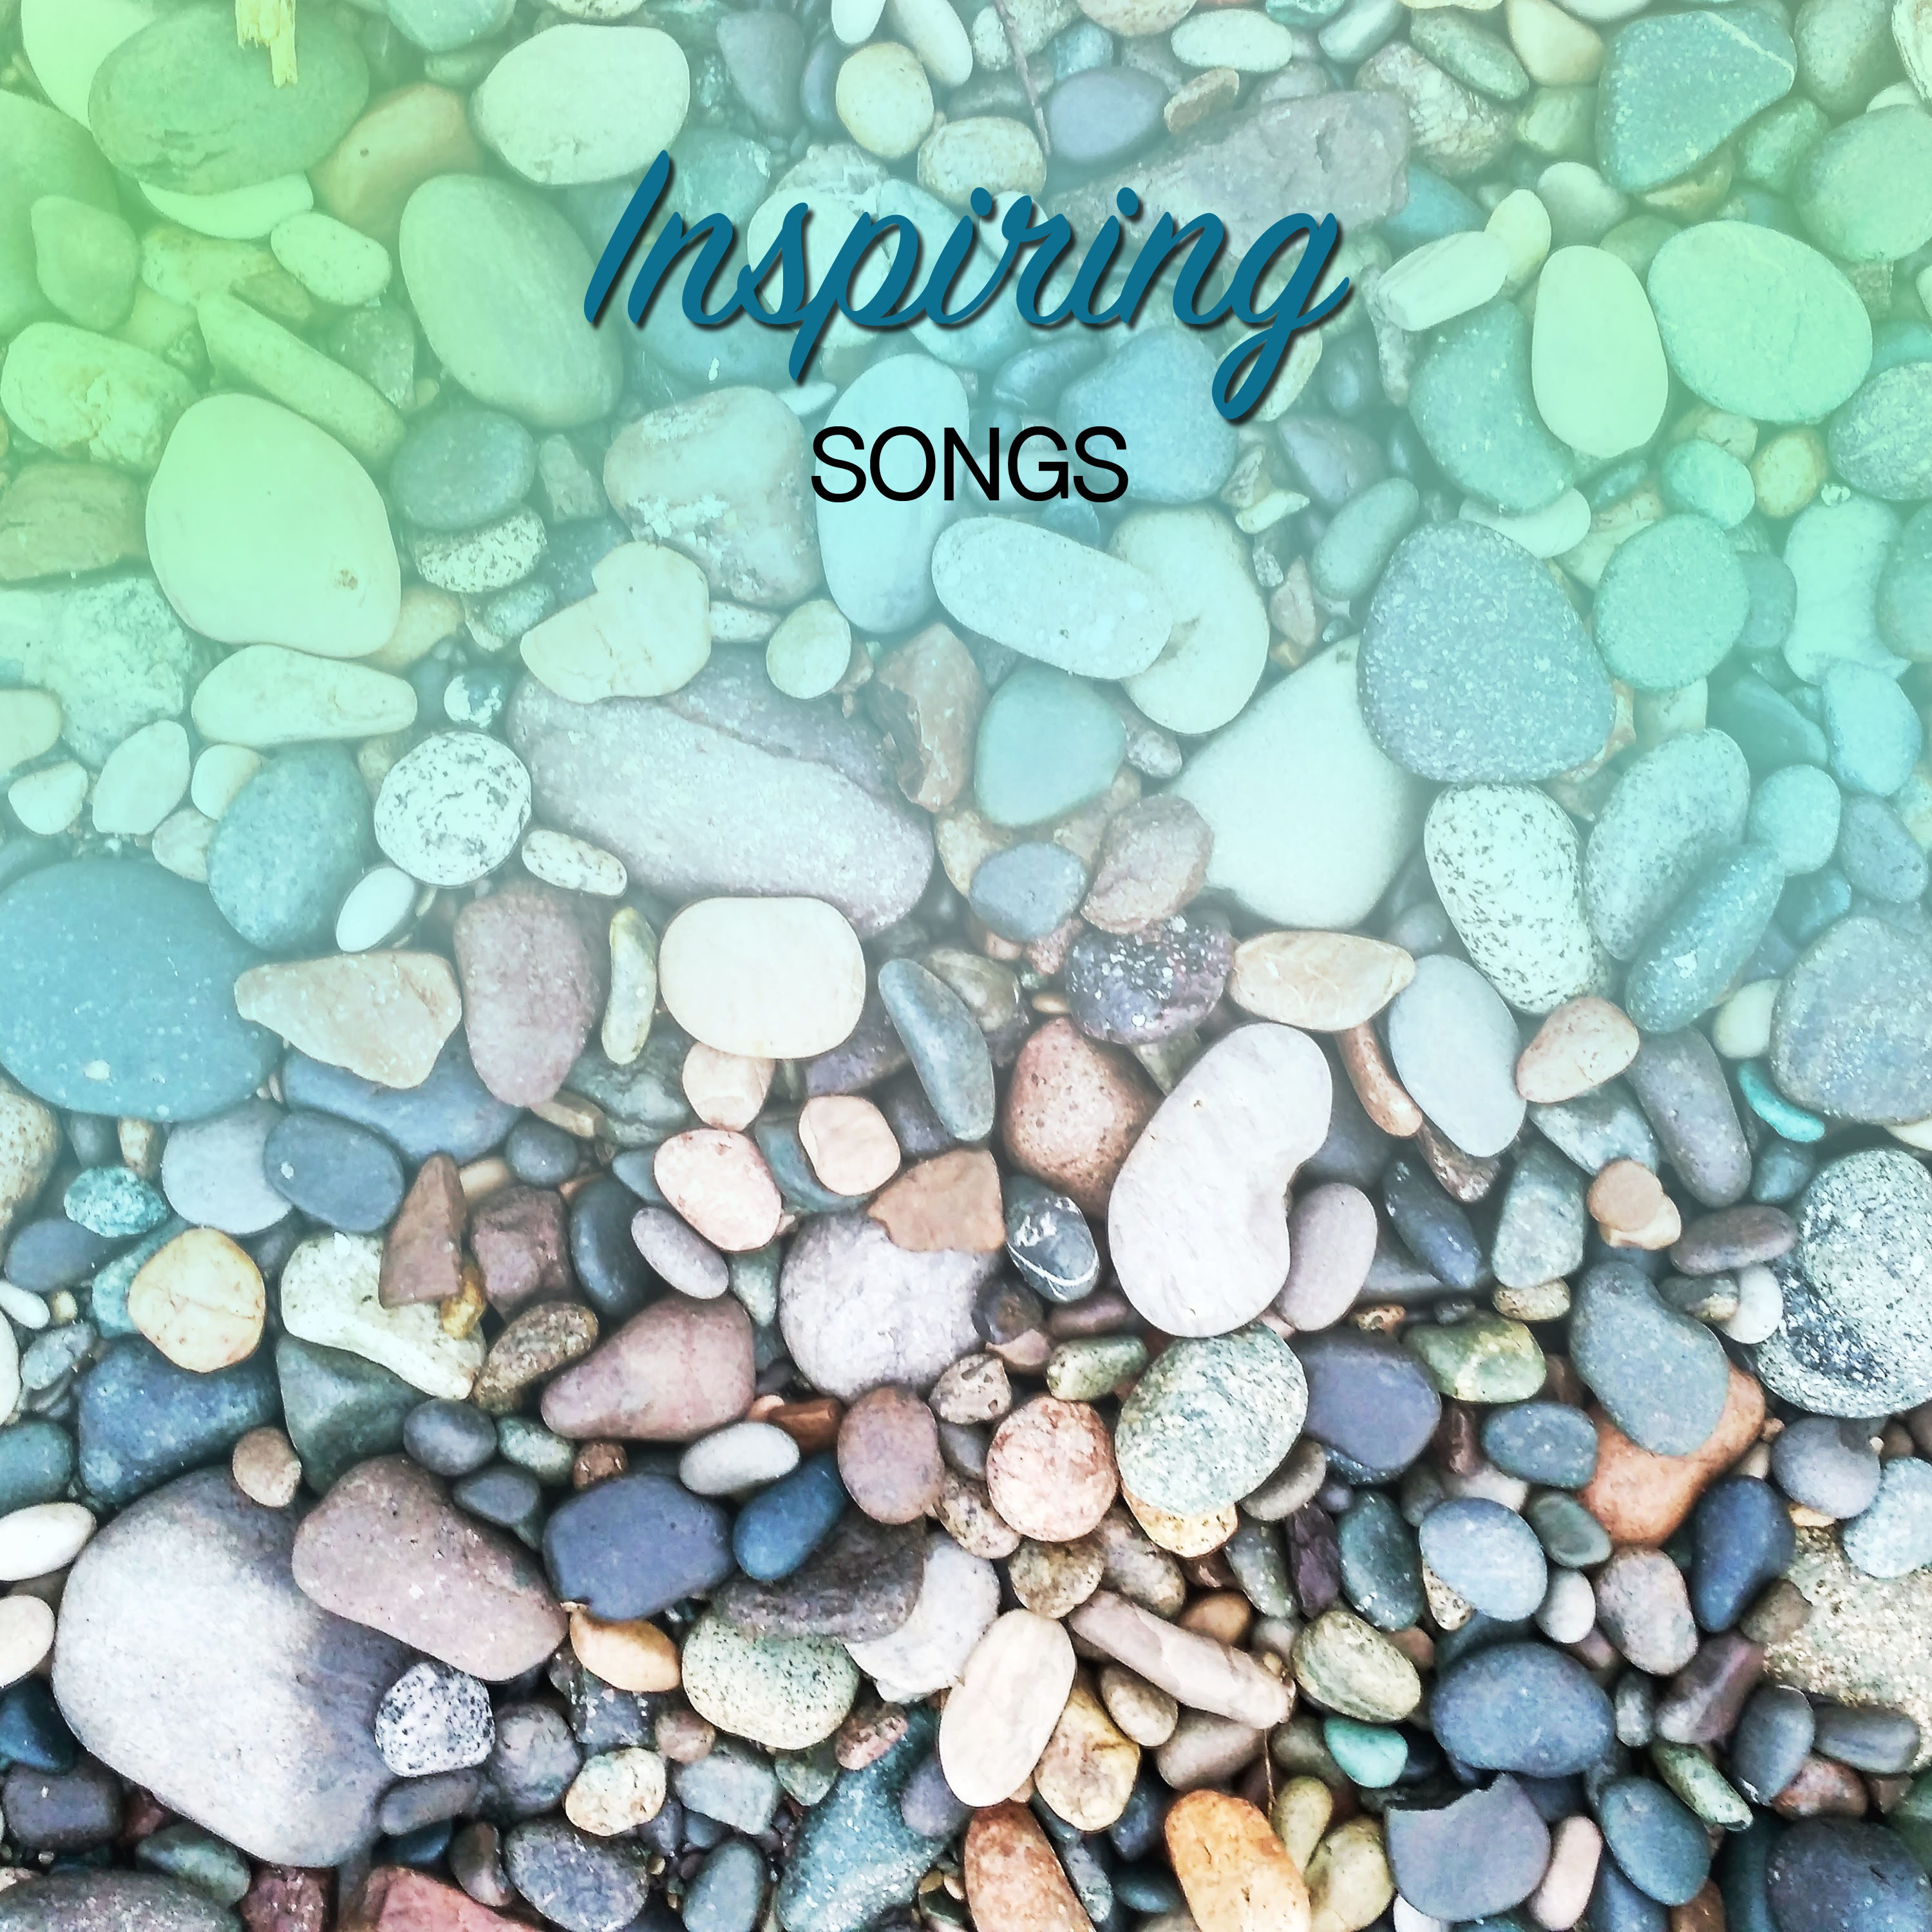 #14 Inspiring Songs to Aid Relaxation & Massage